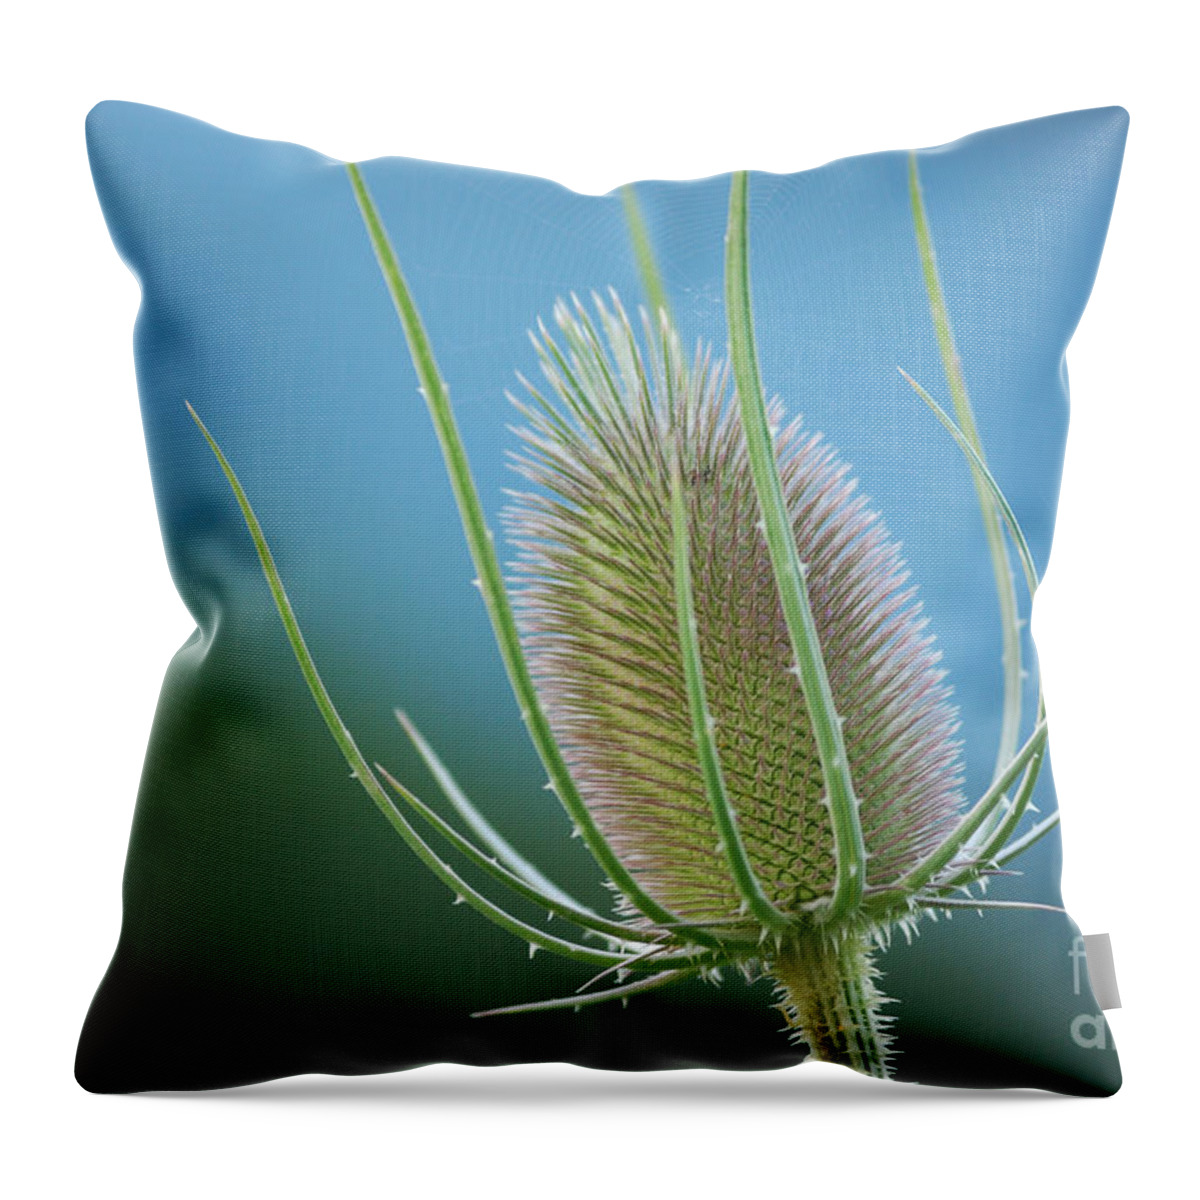 West Virginia Wildflowers Throw Pillow featuring the photograph Teasel Sky by Randy Bodkins